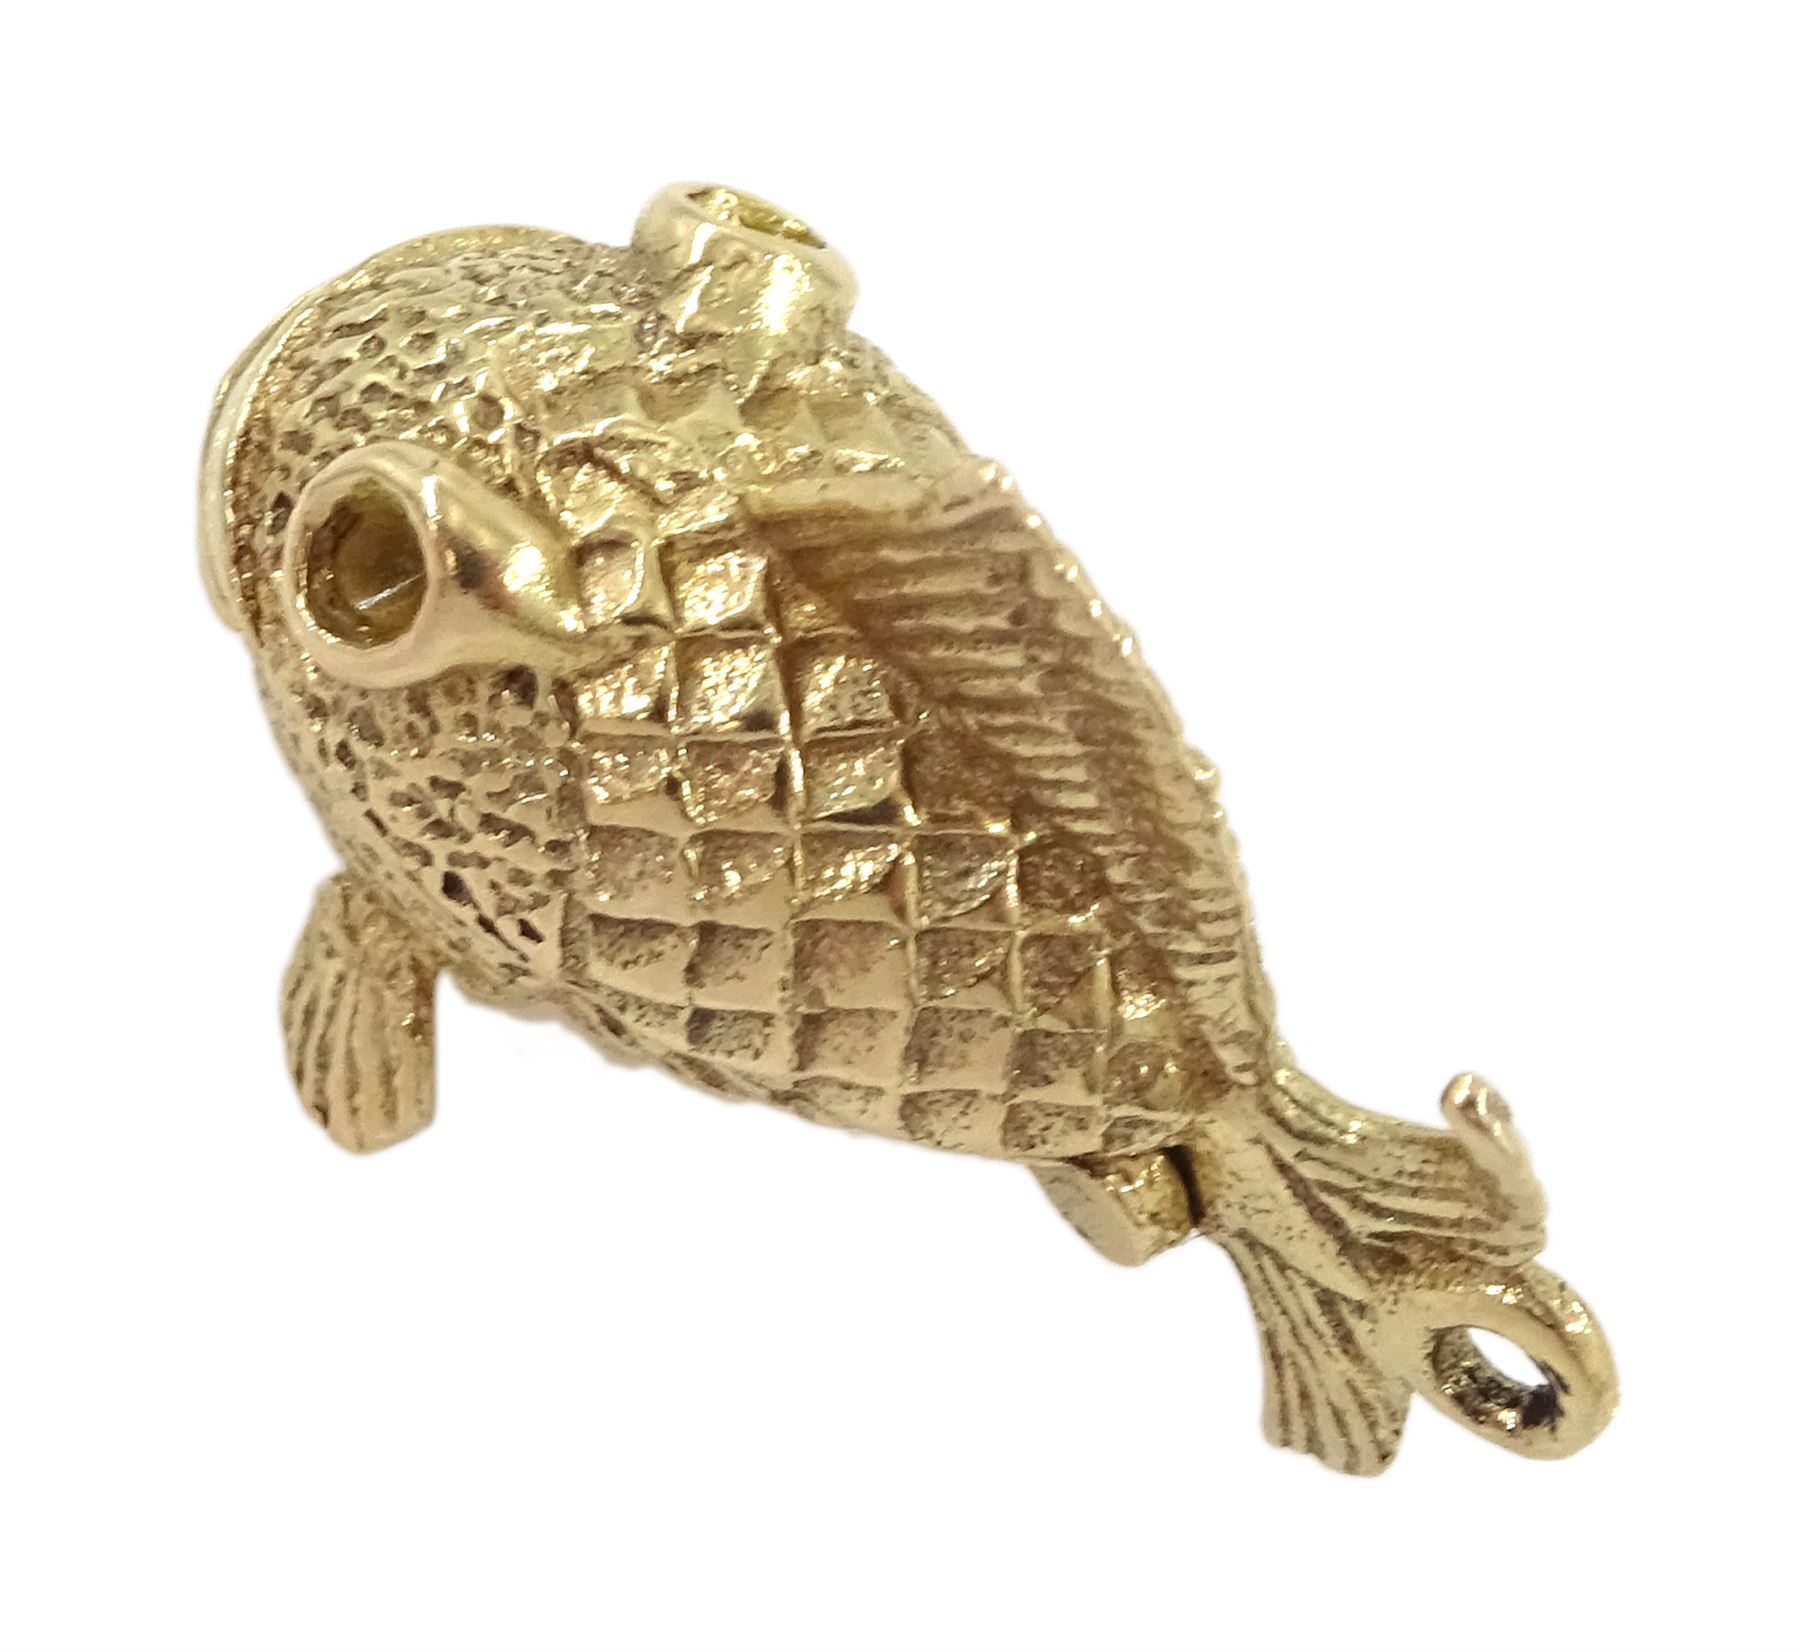 9ct gold fish and hook charm - Image 4 of 4